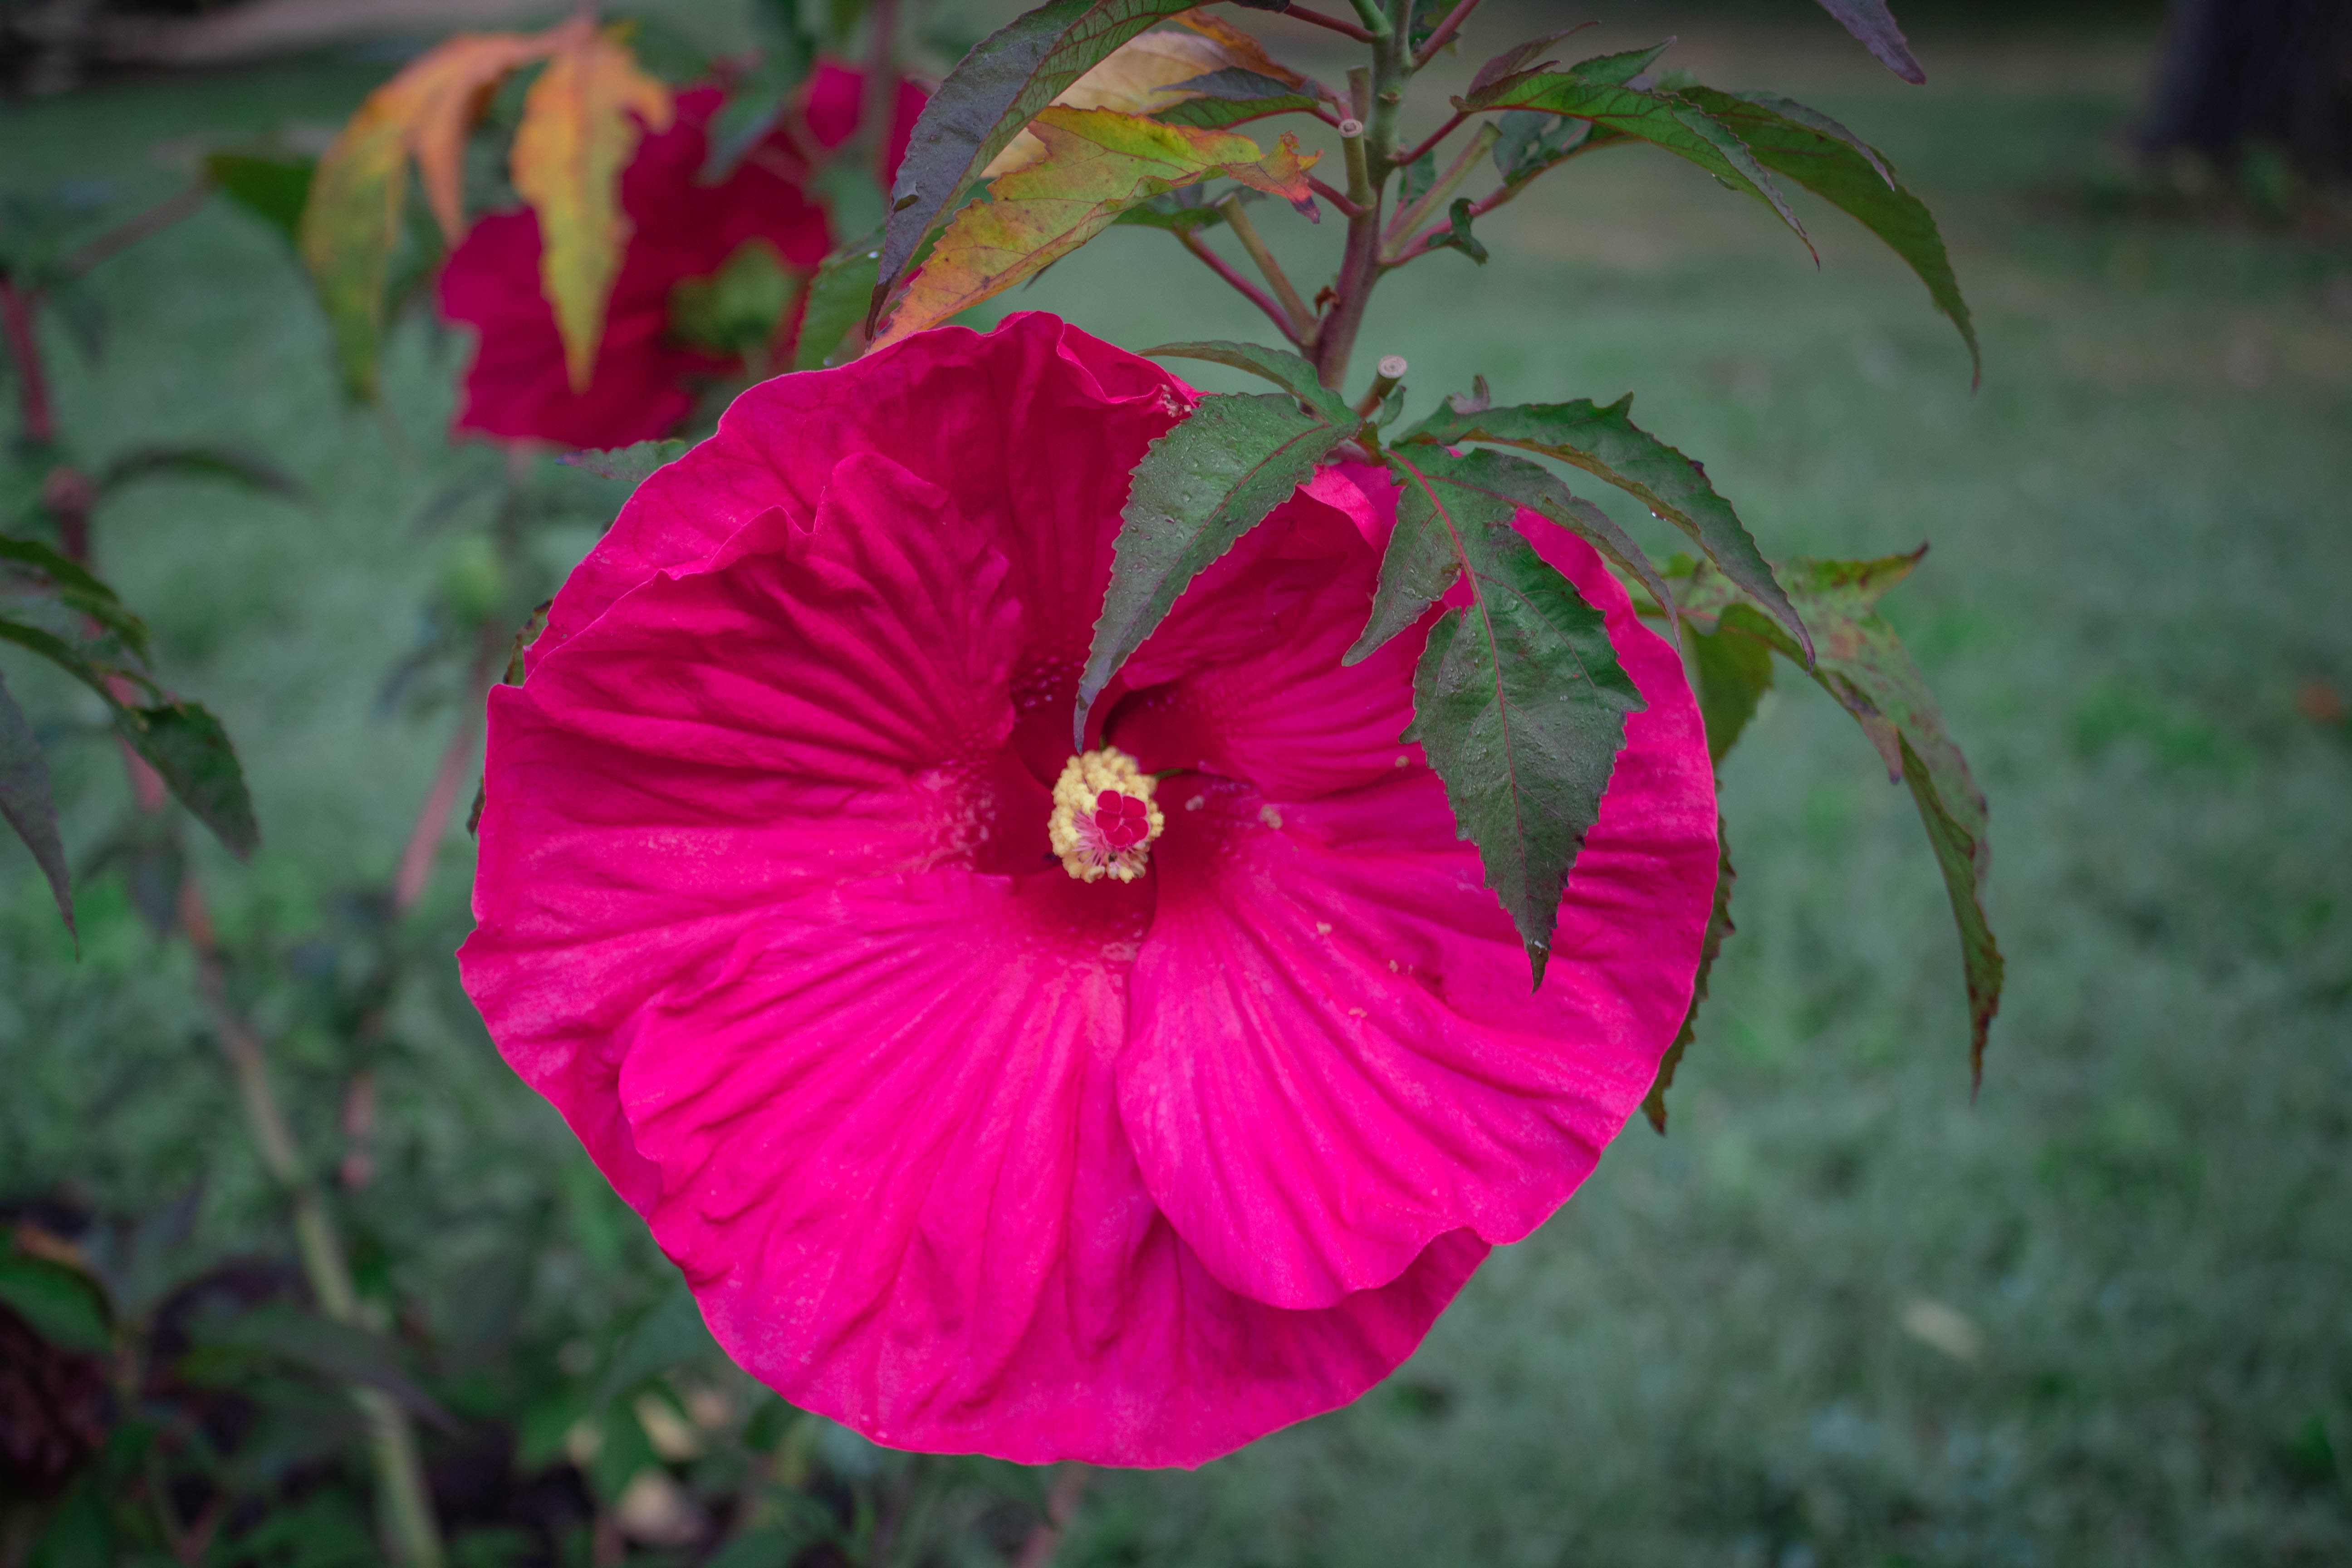 Hardy hibiscus - this month in gardening